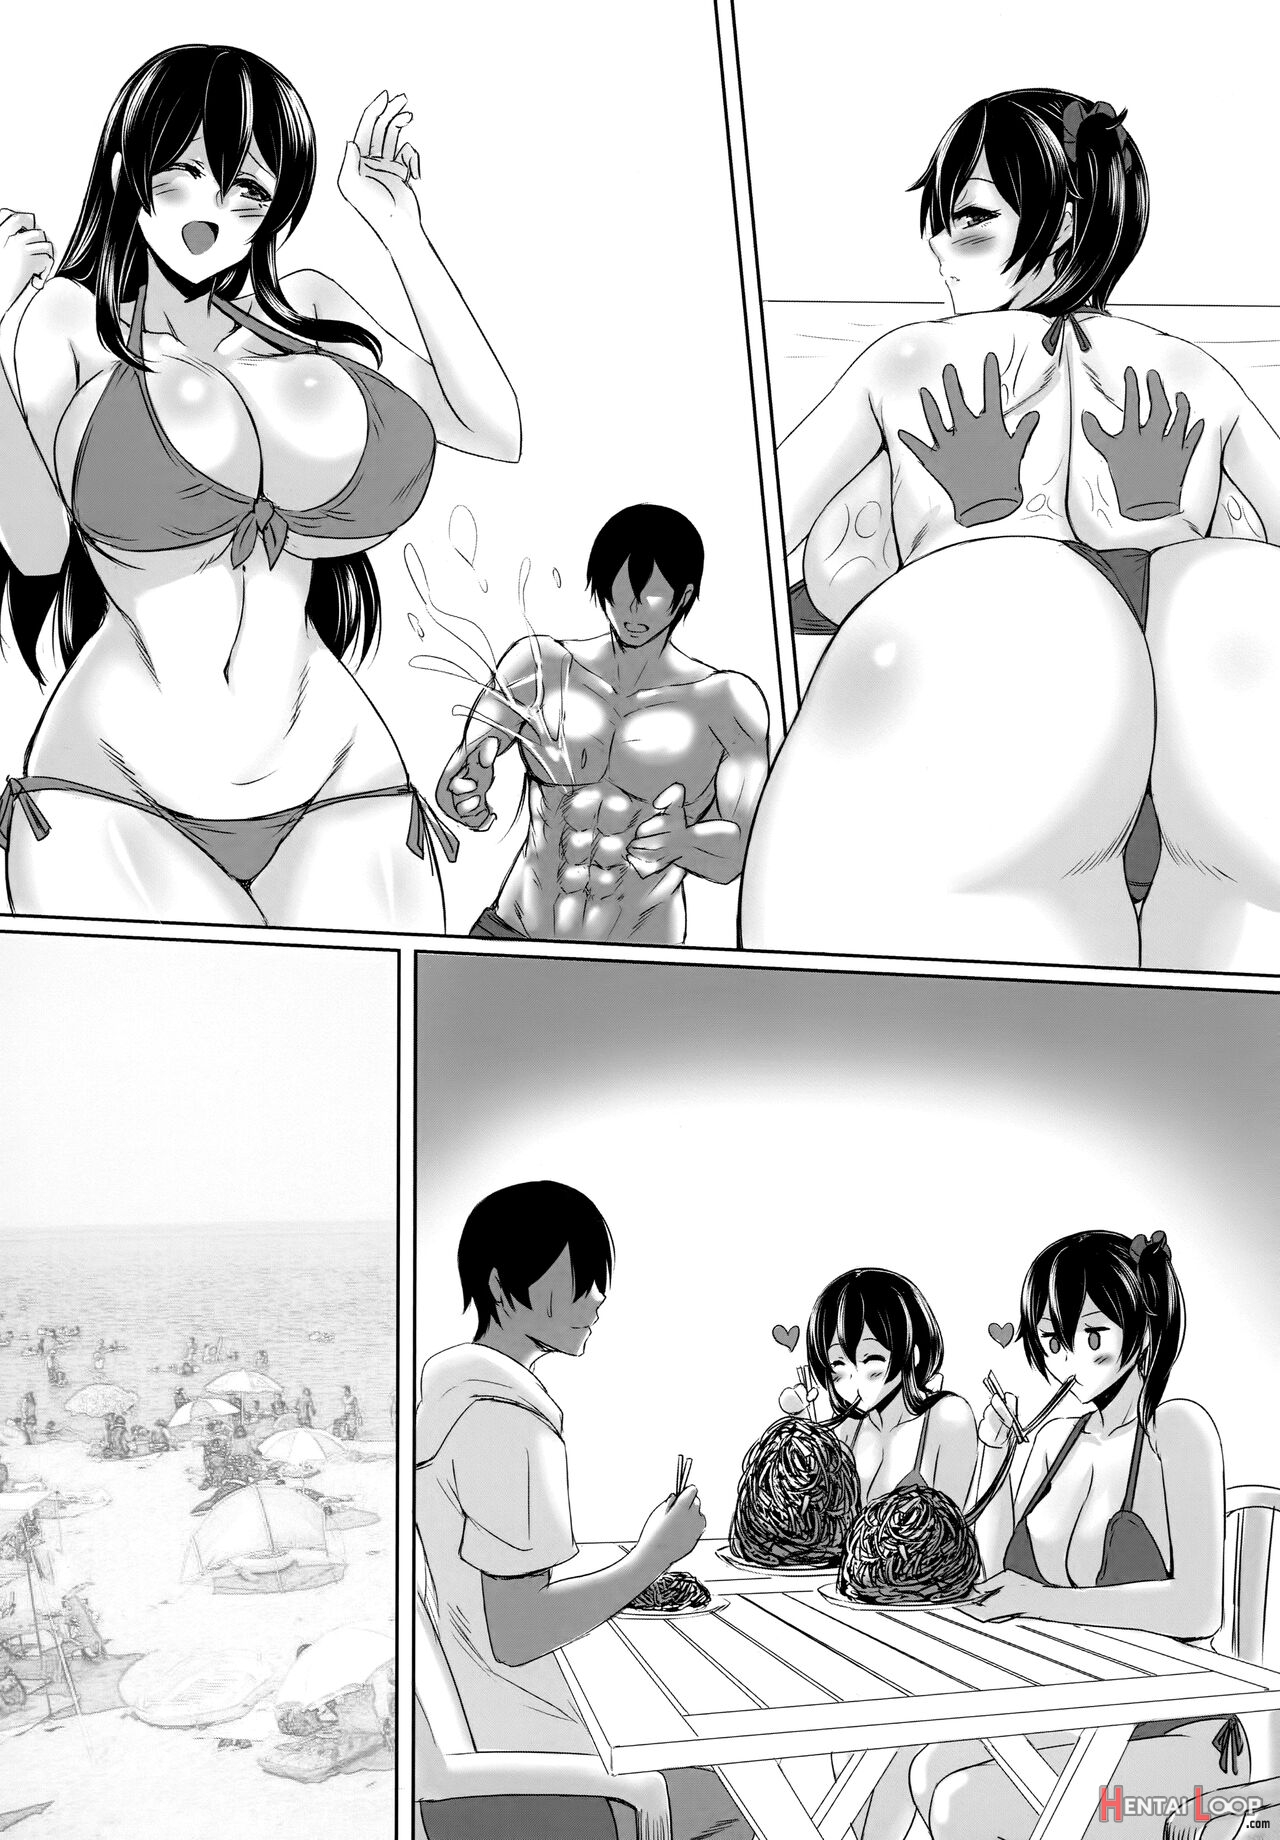 Summer With Fleet Carrier Wives page 4